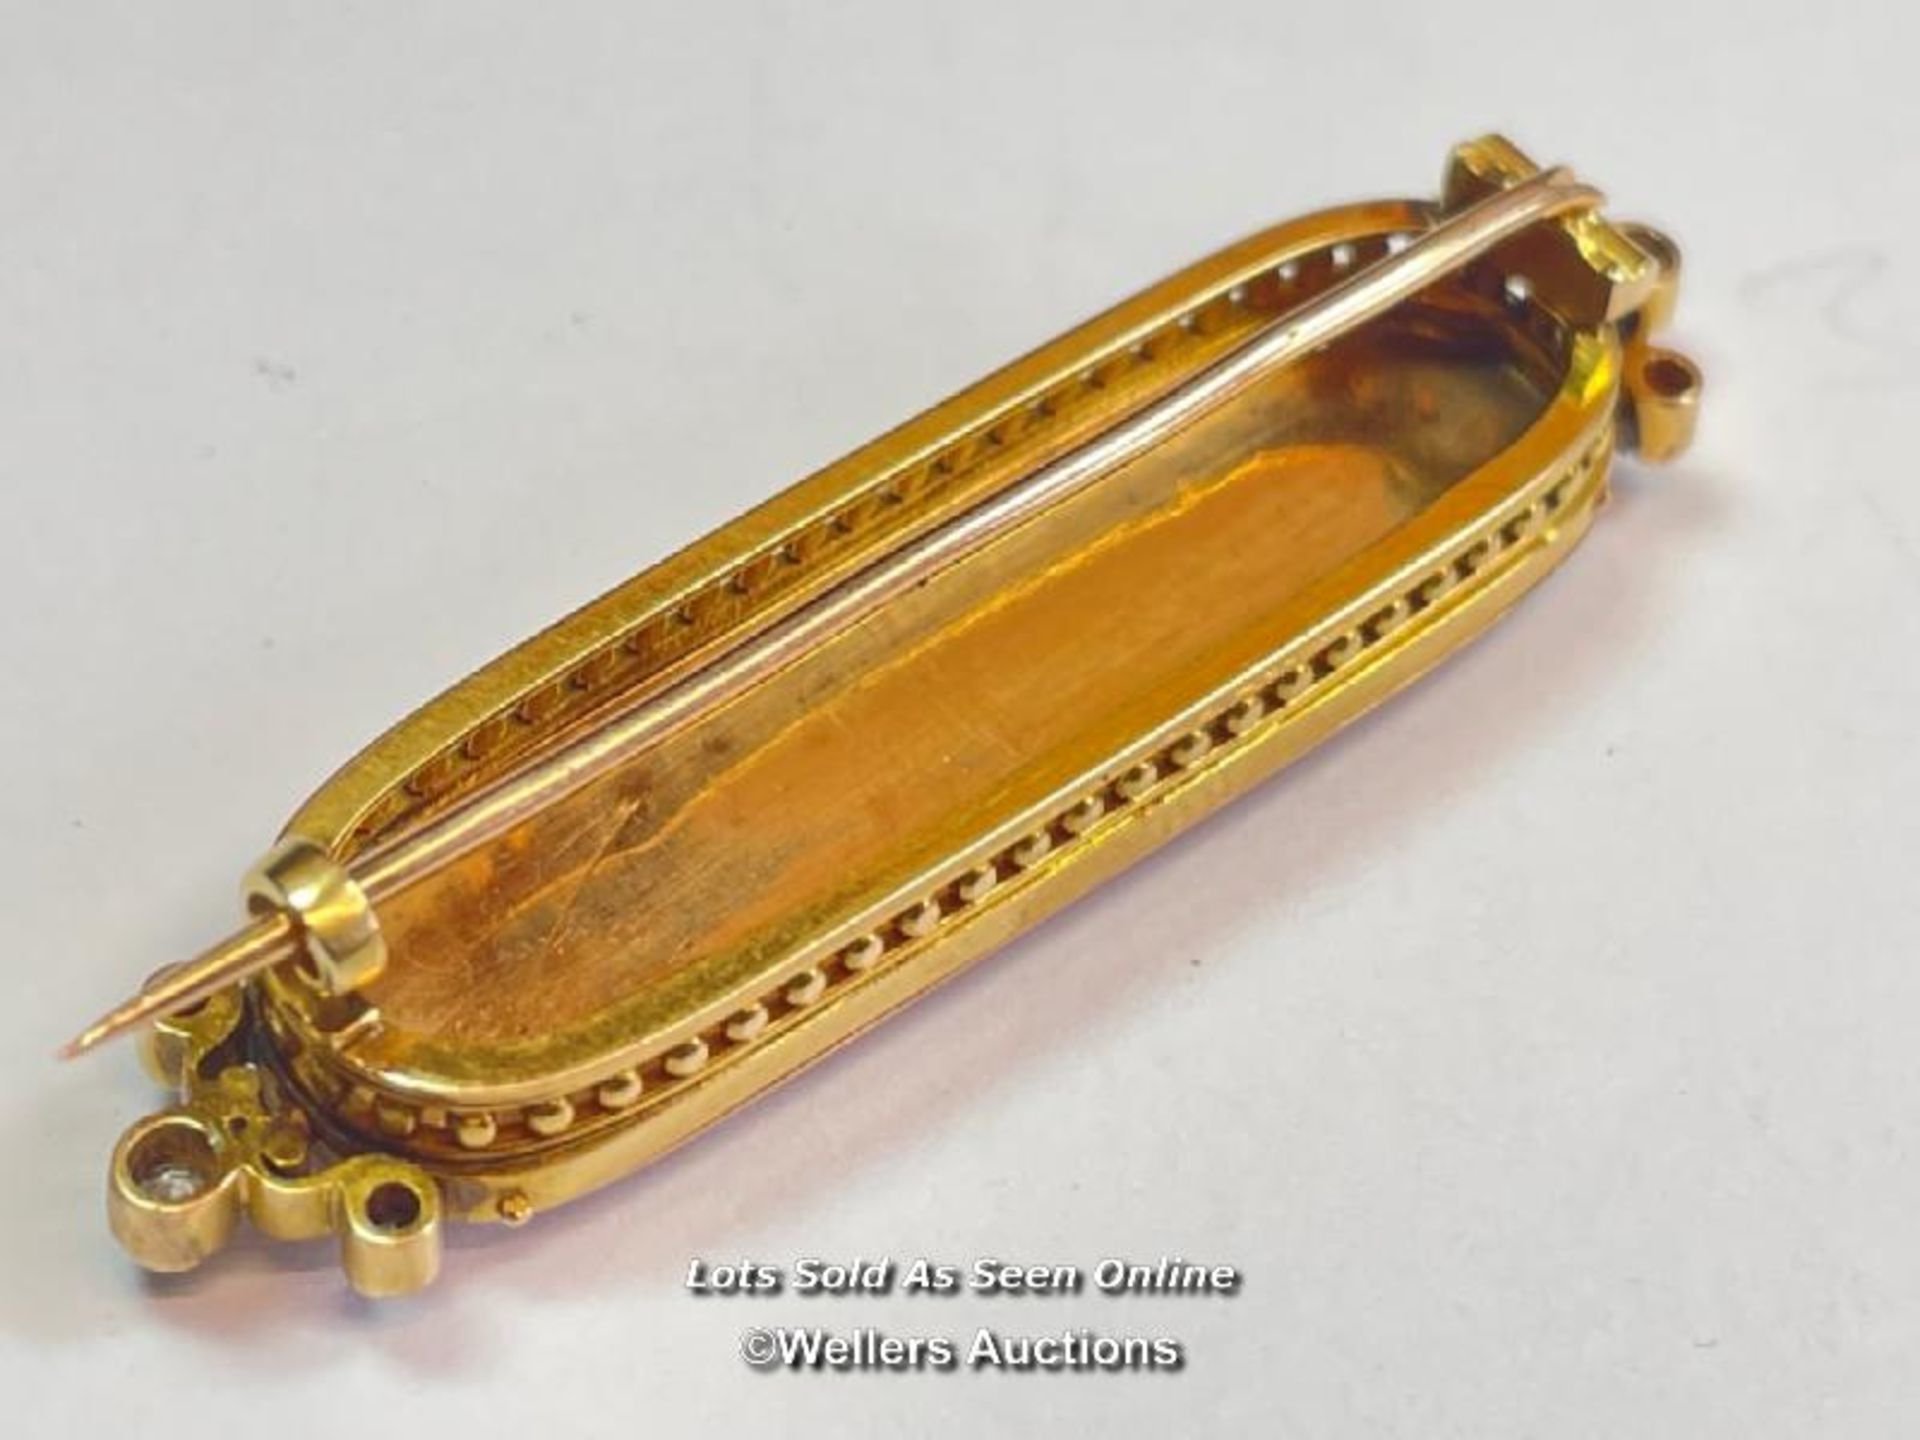 STOCK PIN / BROOCH IN YELLOW METAL WITH THREE ROWS OF SPLIT PEARLS AND ROSE CUT DIAMOND - Image 5 of 5